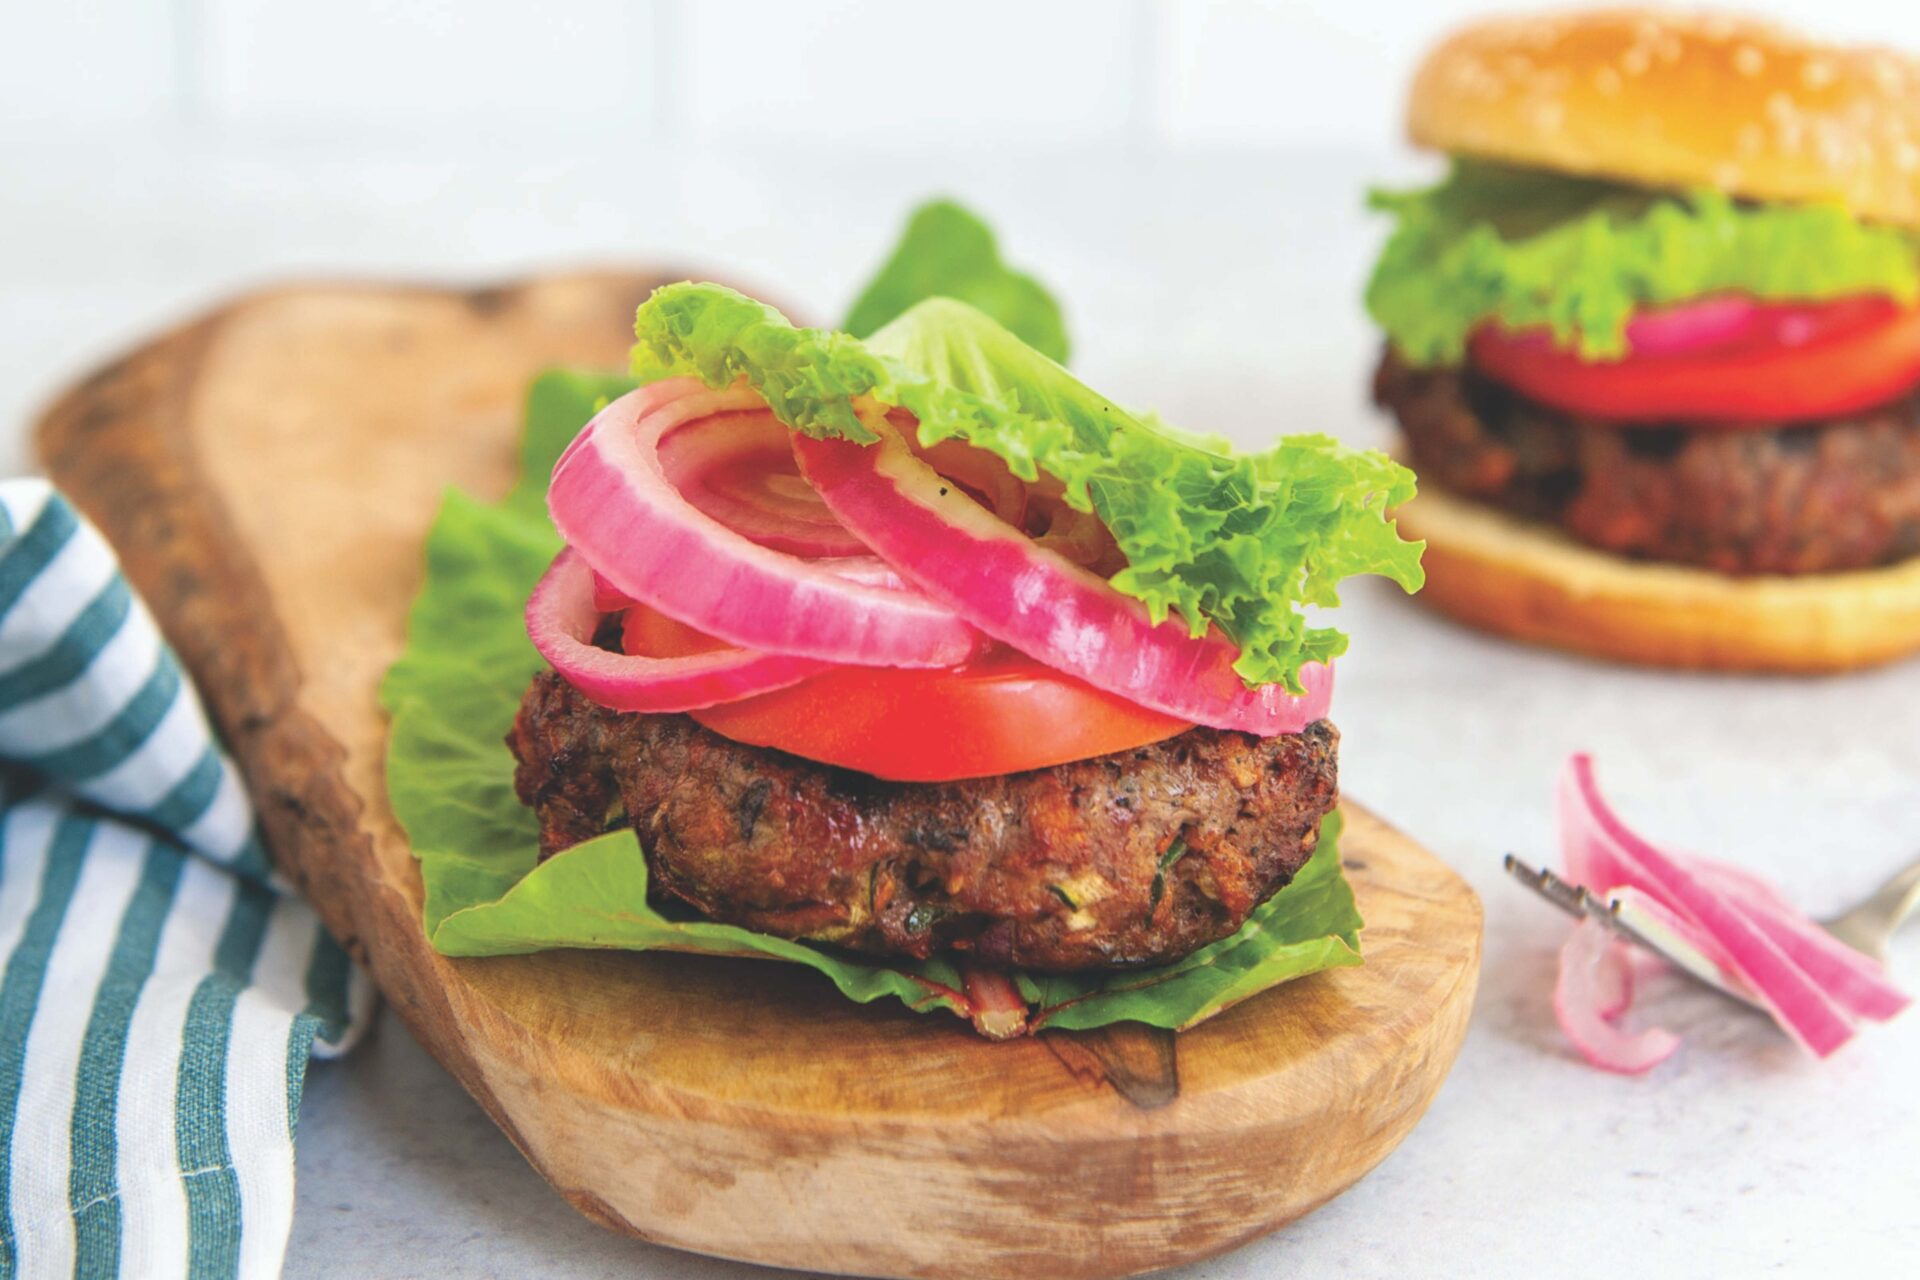 Veggie burgers with all the toppings